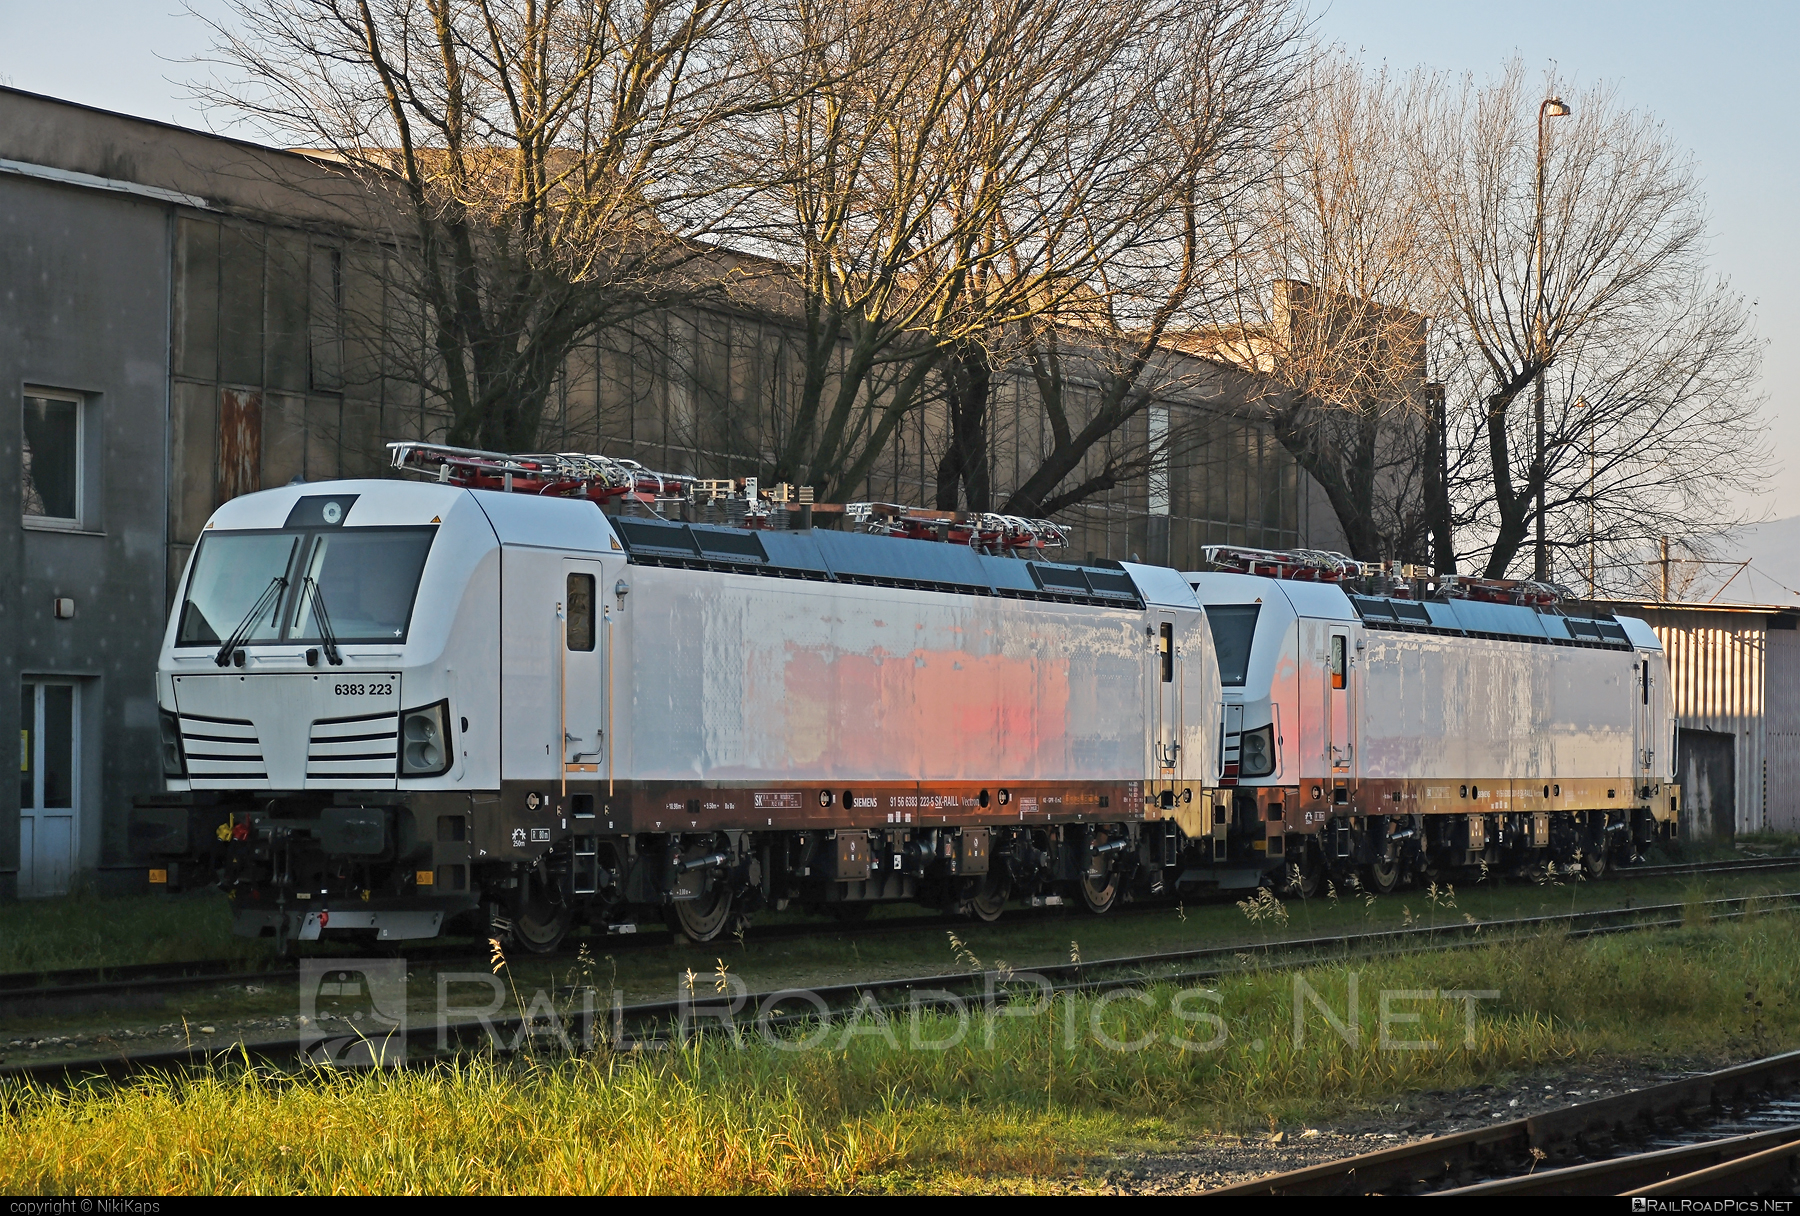 Siemens Vectron MS - 383 223-5 operated by LOKORAIL, a.s. #RollingStockLease #RollingStockLeaseSro #budamar #lokorail #lrl #raill #siemens #siemensVectron #siemensVectronMS #vectron #vectronMS